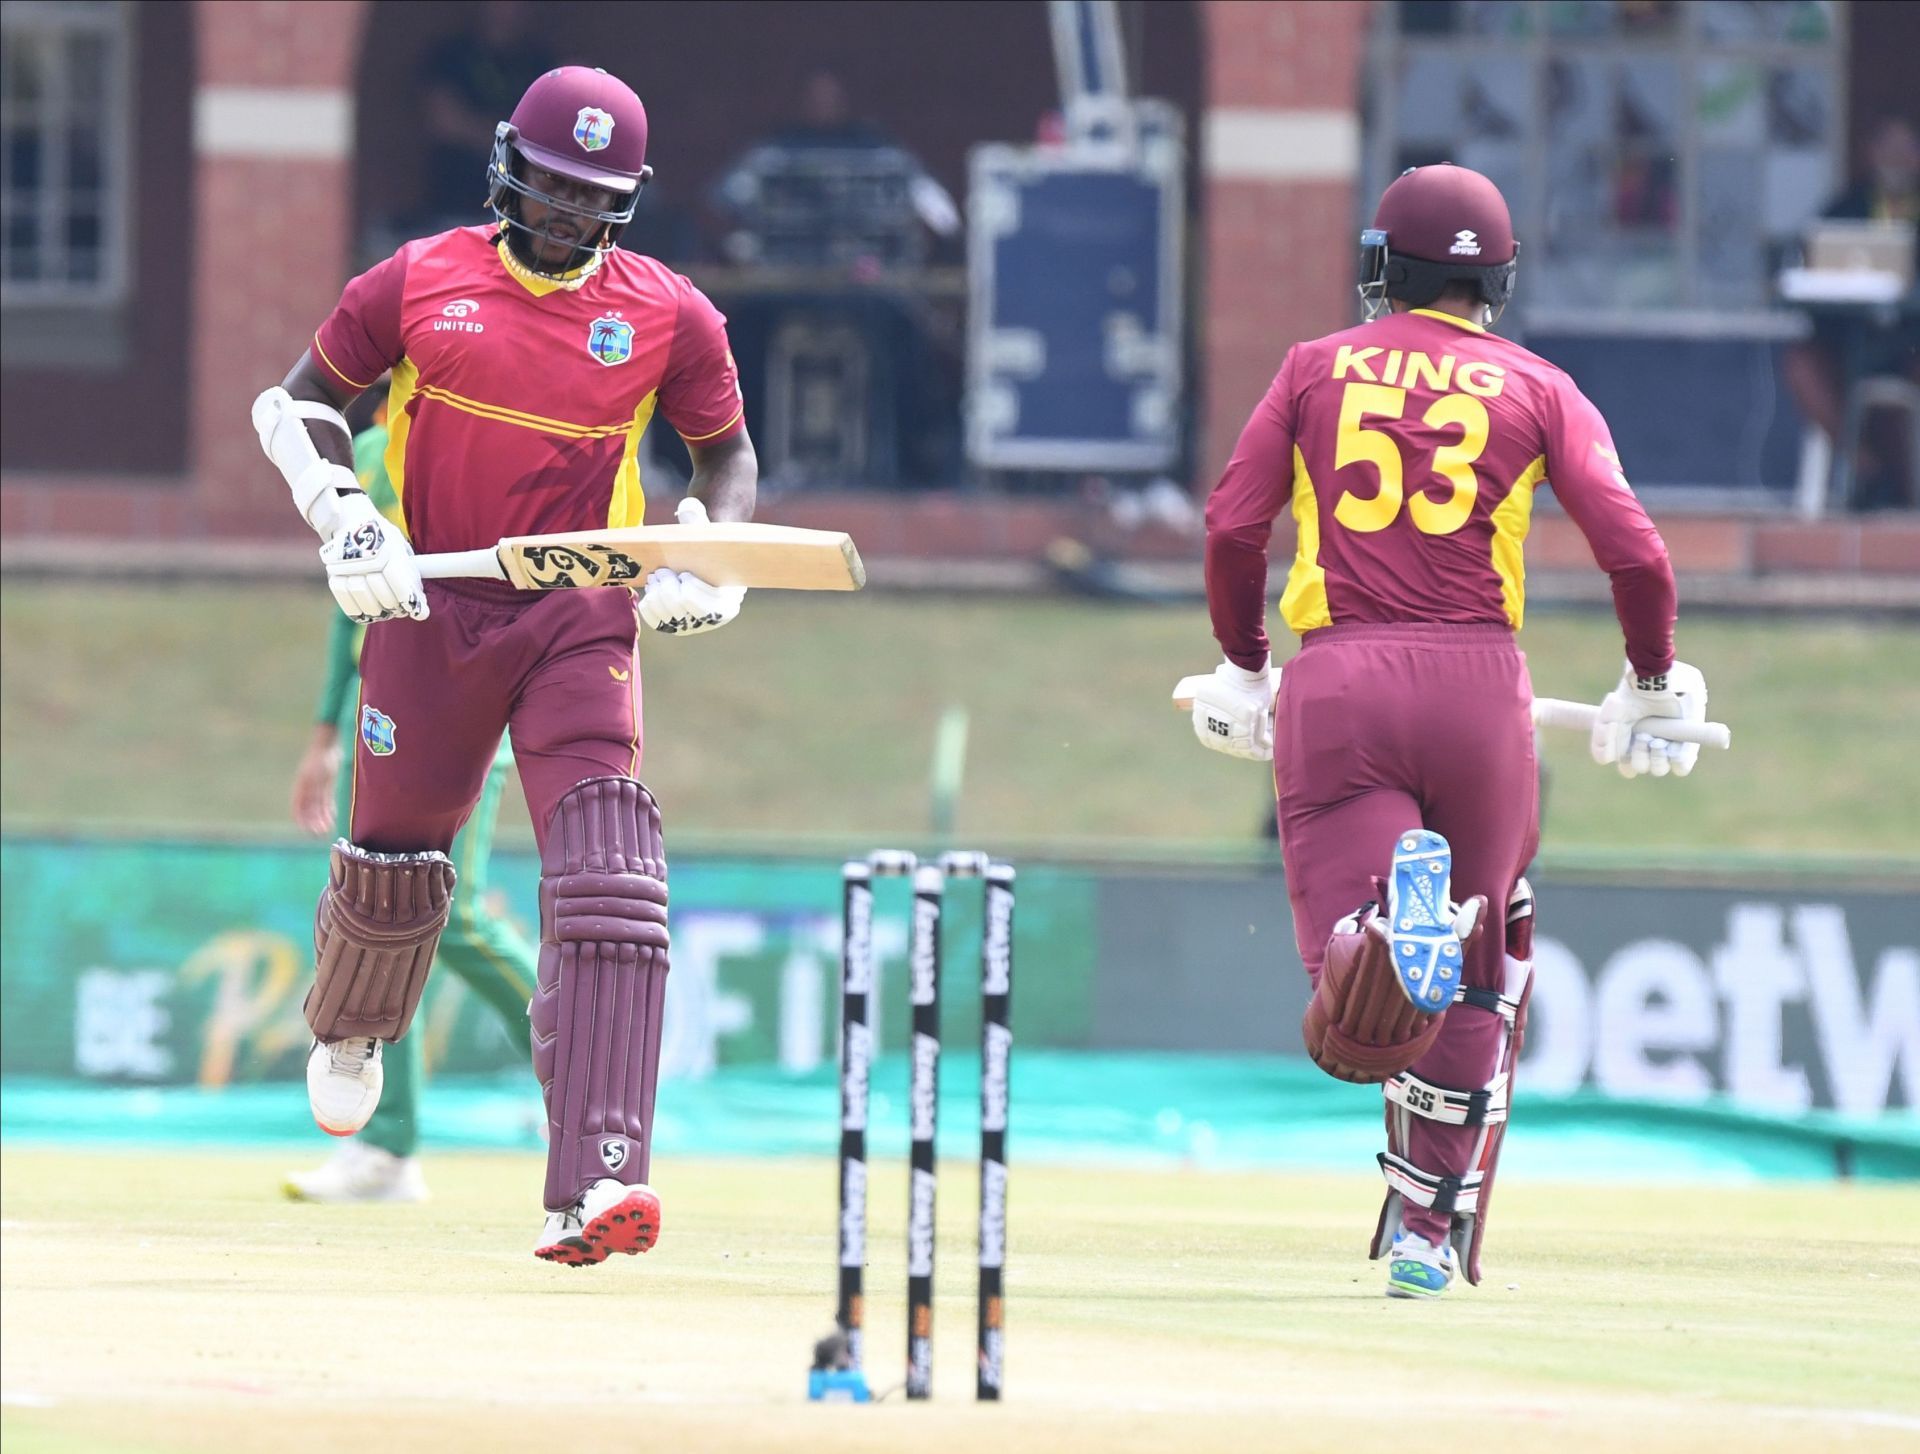 Kyle Mayers and Brandon King might open the batting for the West Indies.